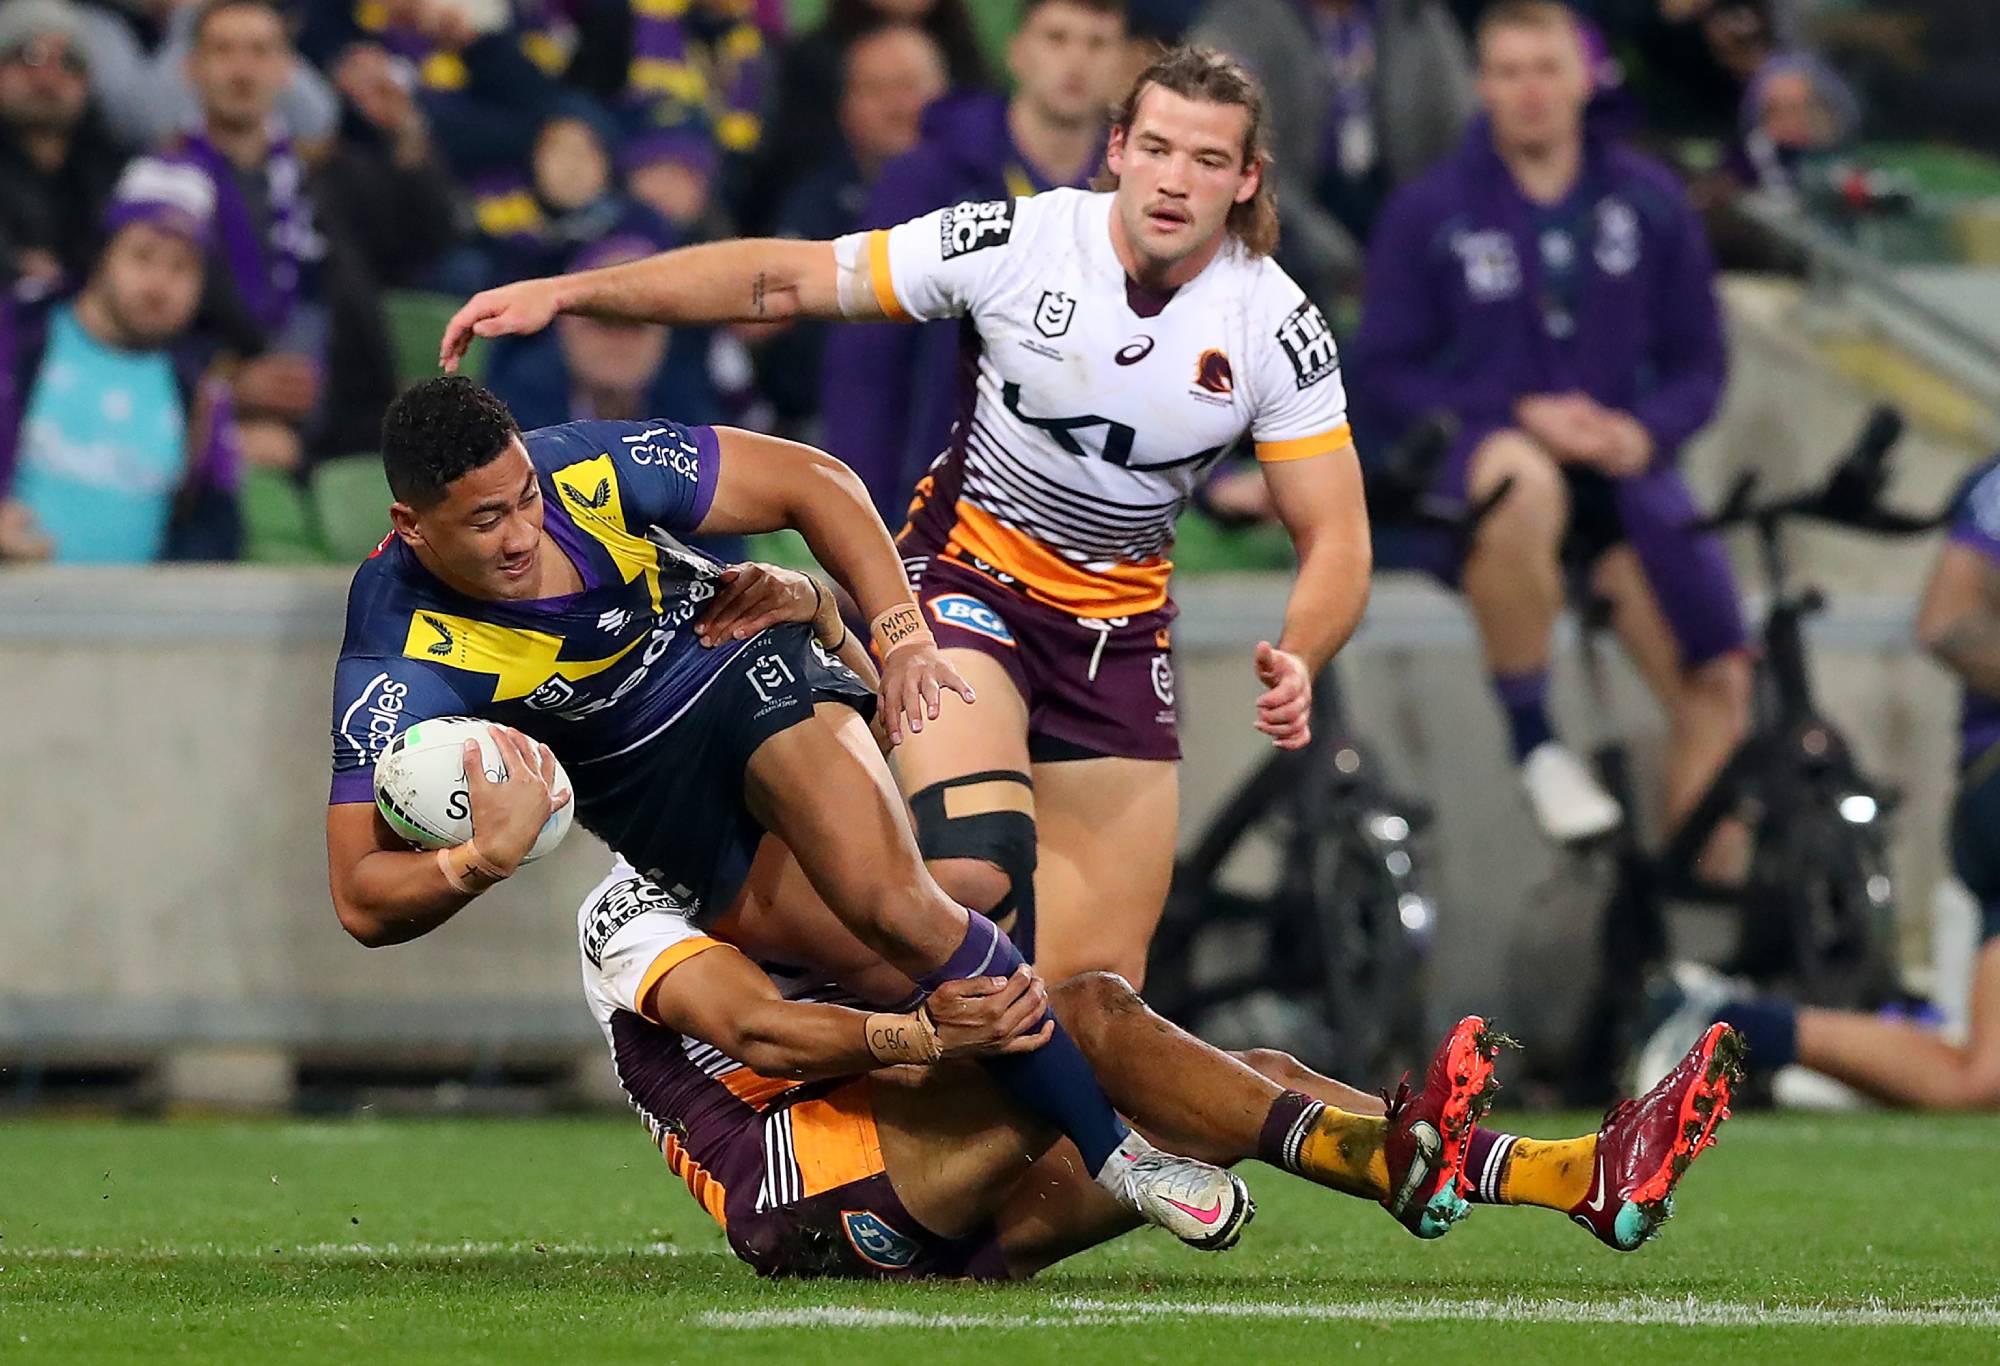 MELBOURNE, AUSTRALIA - JUNE 17: Dean Ieremia of the Storm is tackled during the round 15 NRL match between the Melbourne Storm and the Brisbane Broncos at AAMI Park, on June 17, 2022, in Melbourne, Australia. (Photo by Kelly Defina/Getty Images)